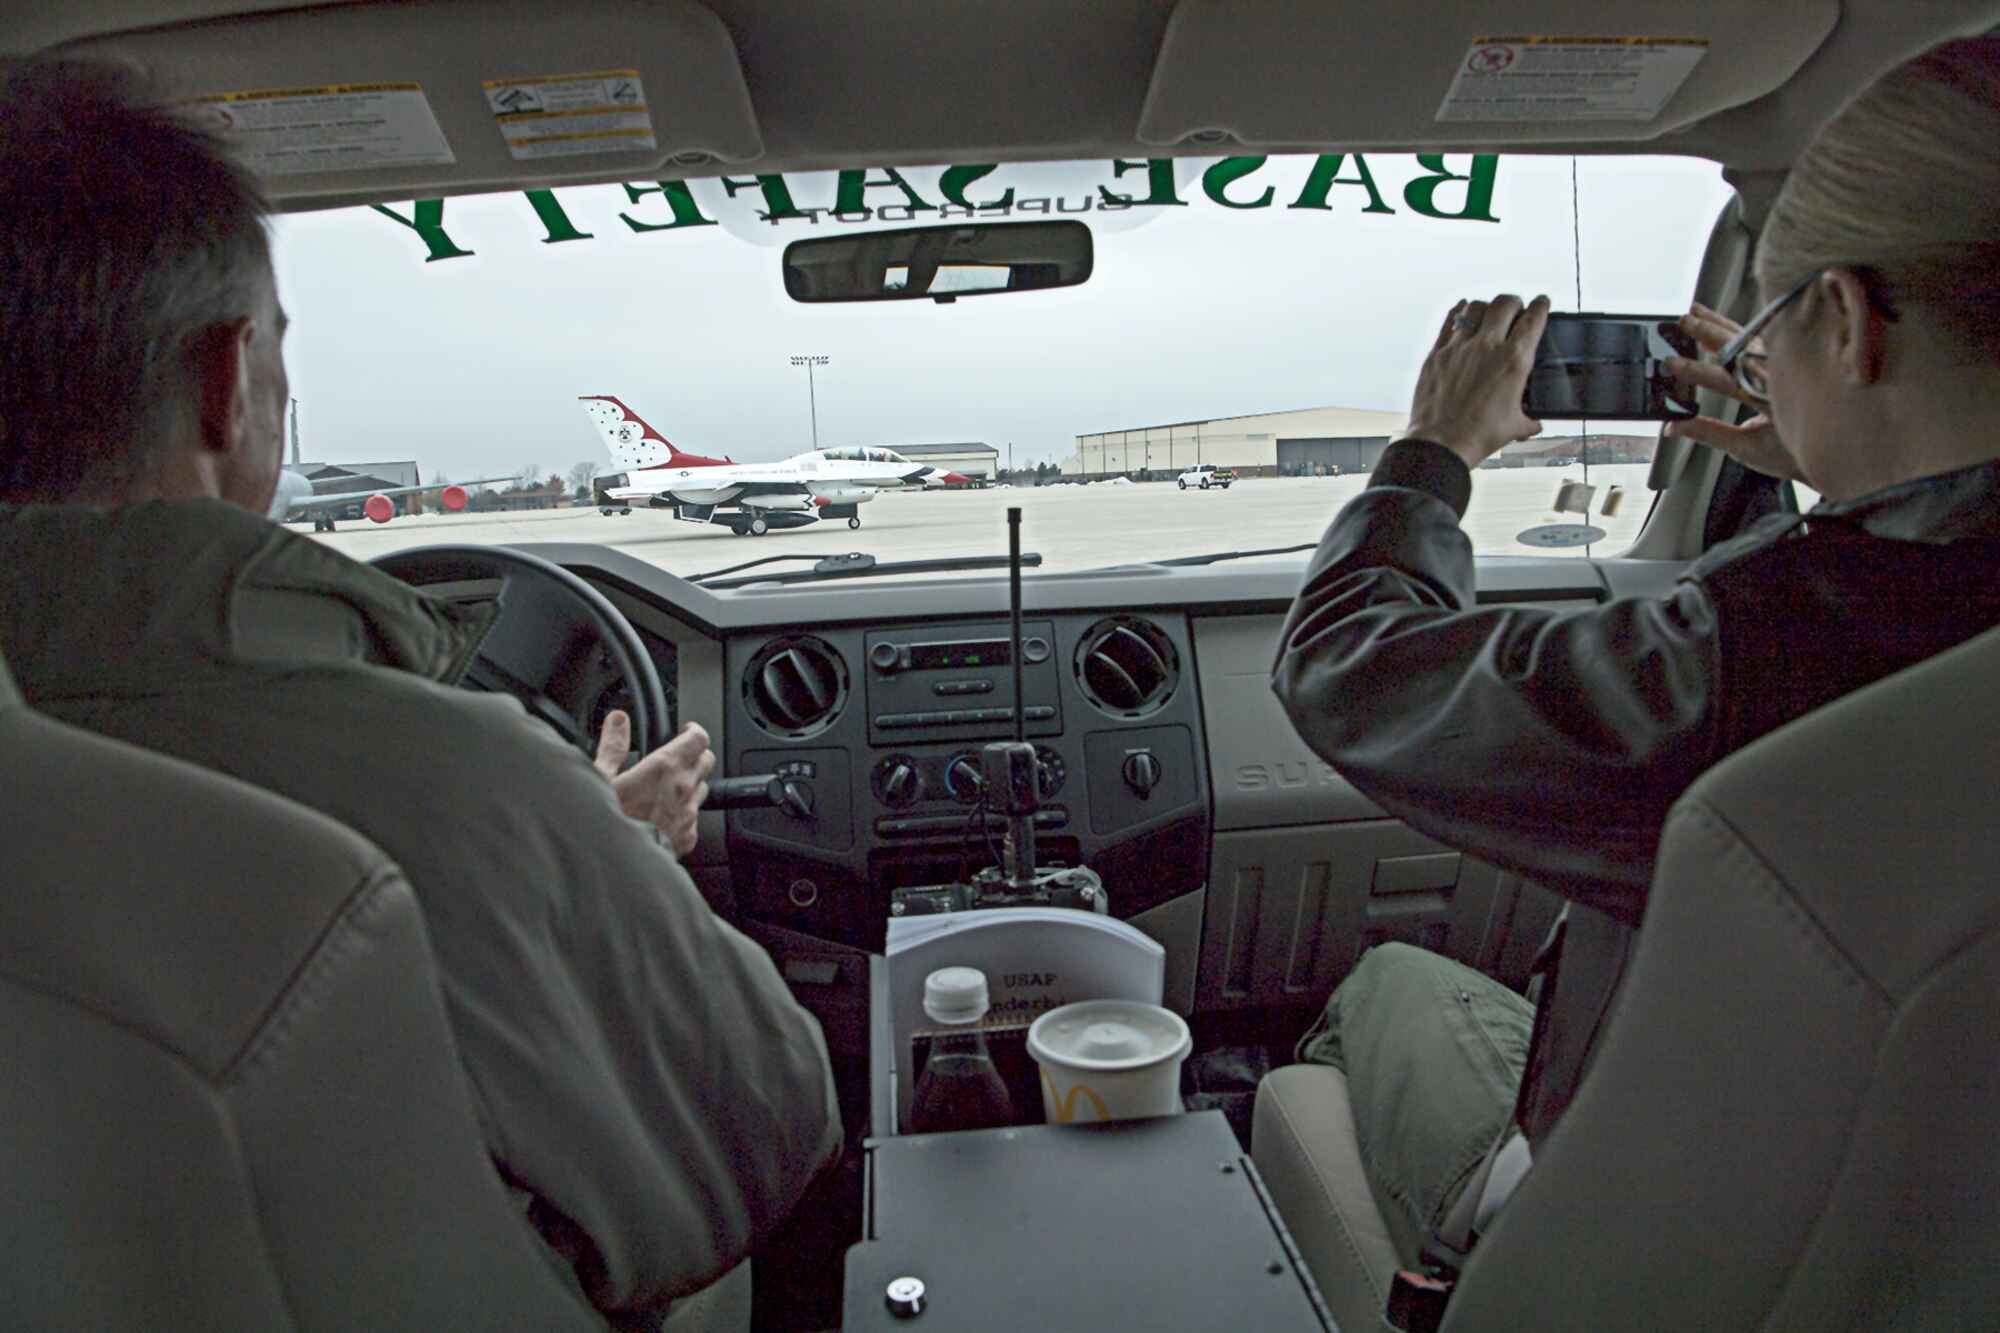 Lt. Col. Billy Werth, left, and Master Sgt. Deborah Wood, both airshow planning team members, follow Thunderbird 8 as it taxis to a parking spot at Grissom Air Reserve Base, Ind., Feb. 5, 2019. Thunderbird team members Maj. Jason Markzon, and Tech Sgt. Bryson Schuster, visited the base for a site visit and overview as preparations build for the Grissom Air and Space Expo scheduled for Sept. 7-8. (U.S. Air Force photo/Douglas Hays)